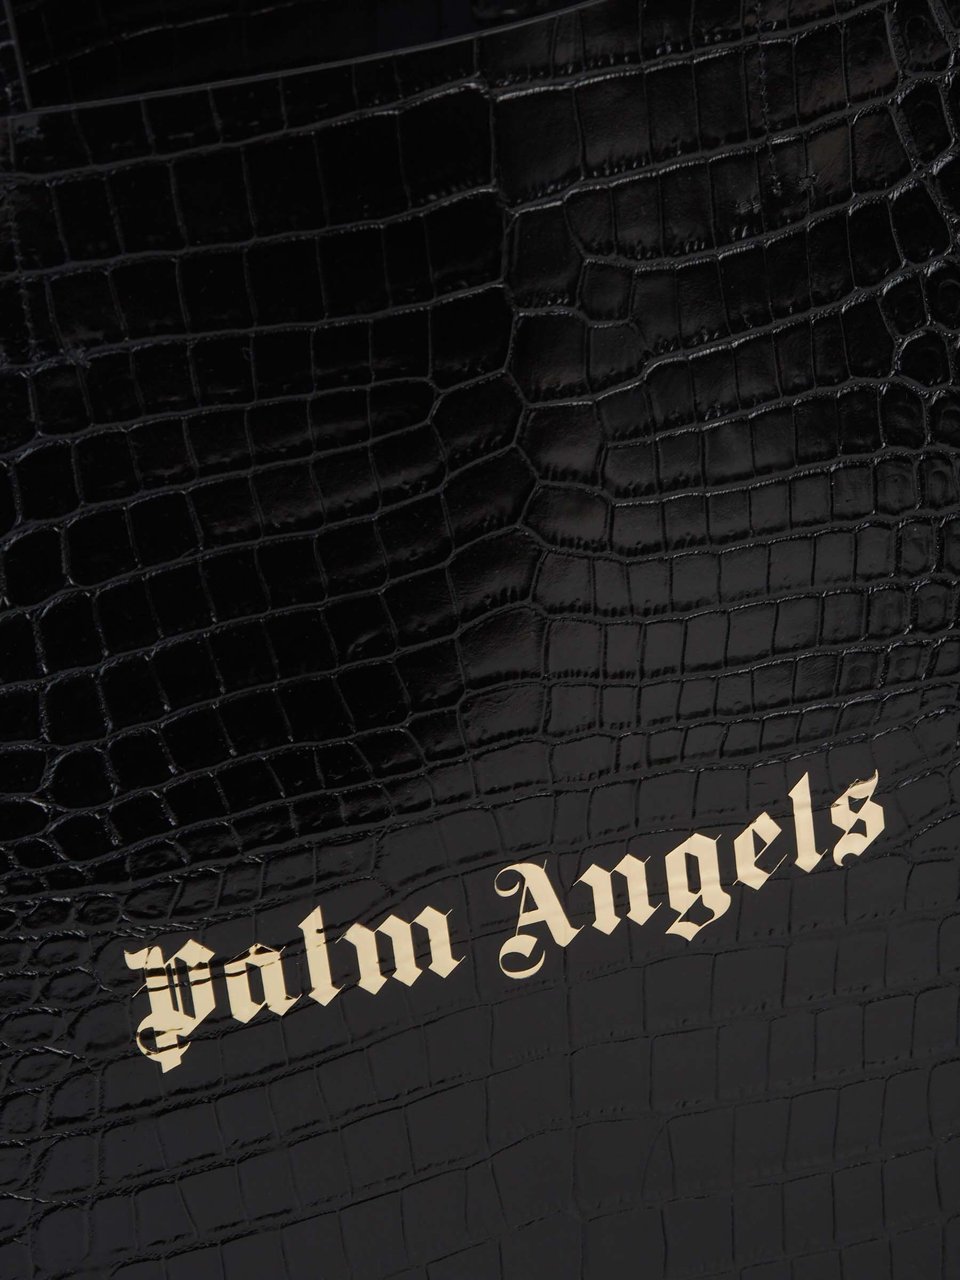 Palm Angels Leather Tote Bag Zwart